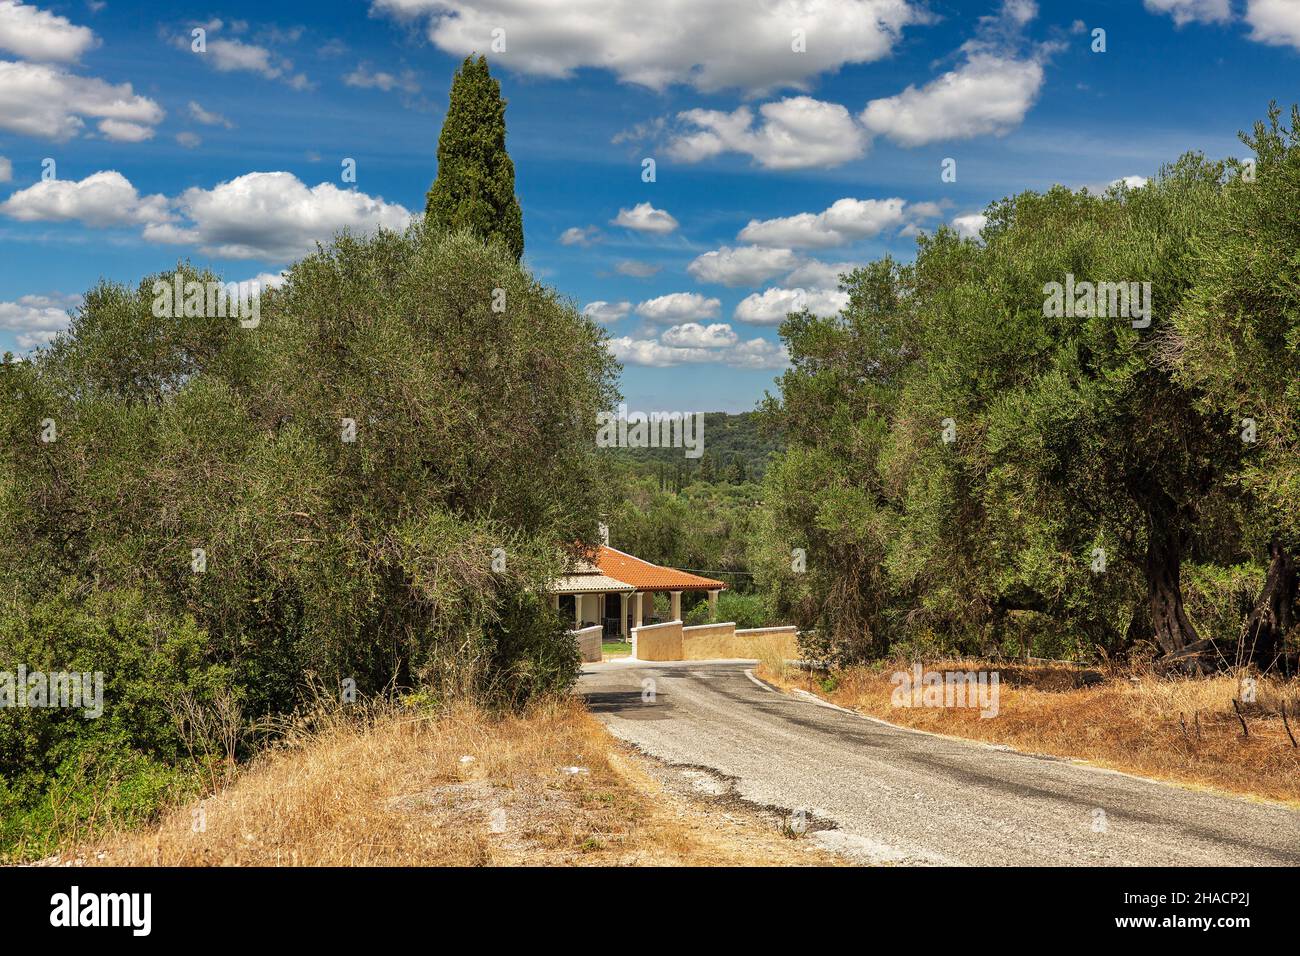 Typical Corfu island summer rural landscape with olive trees, villa and road. Greece. Stock Photo